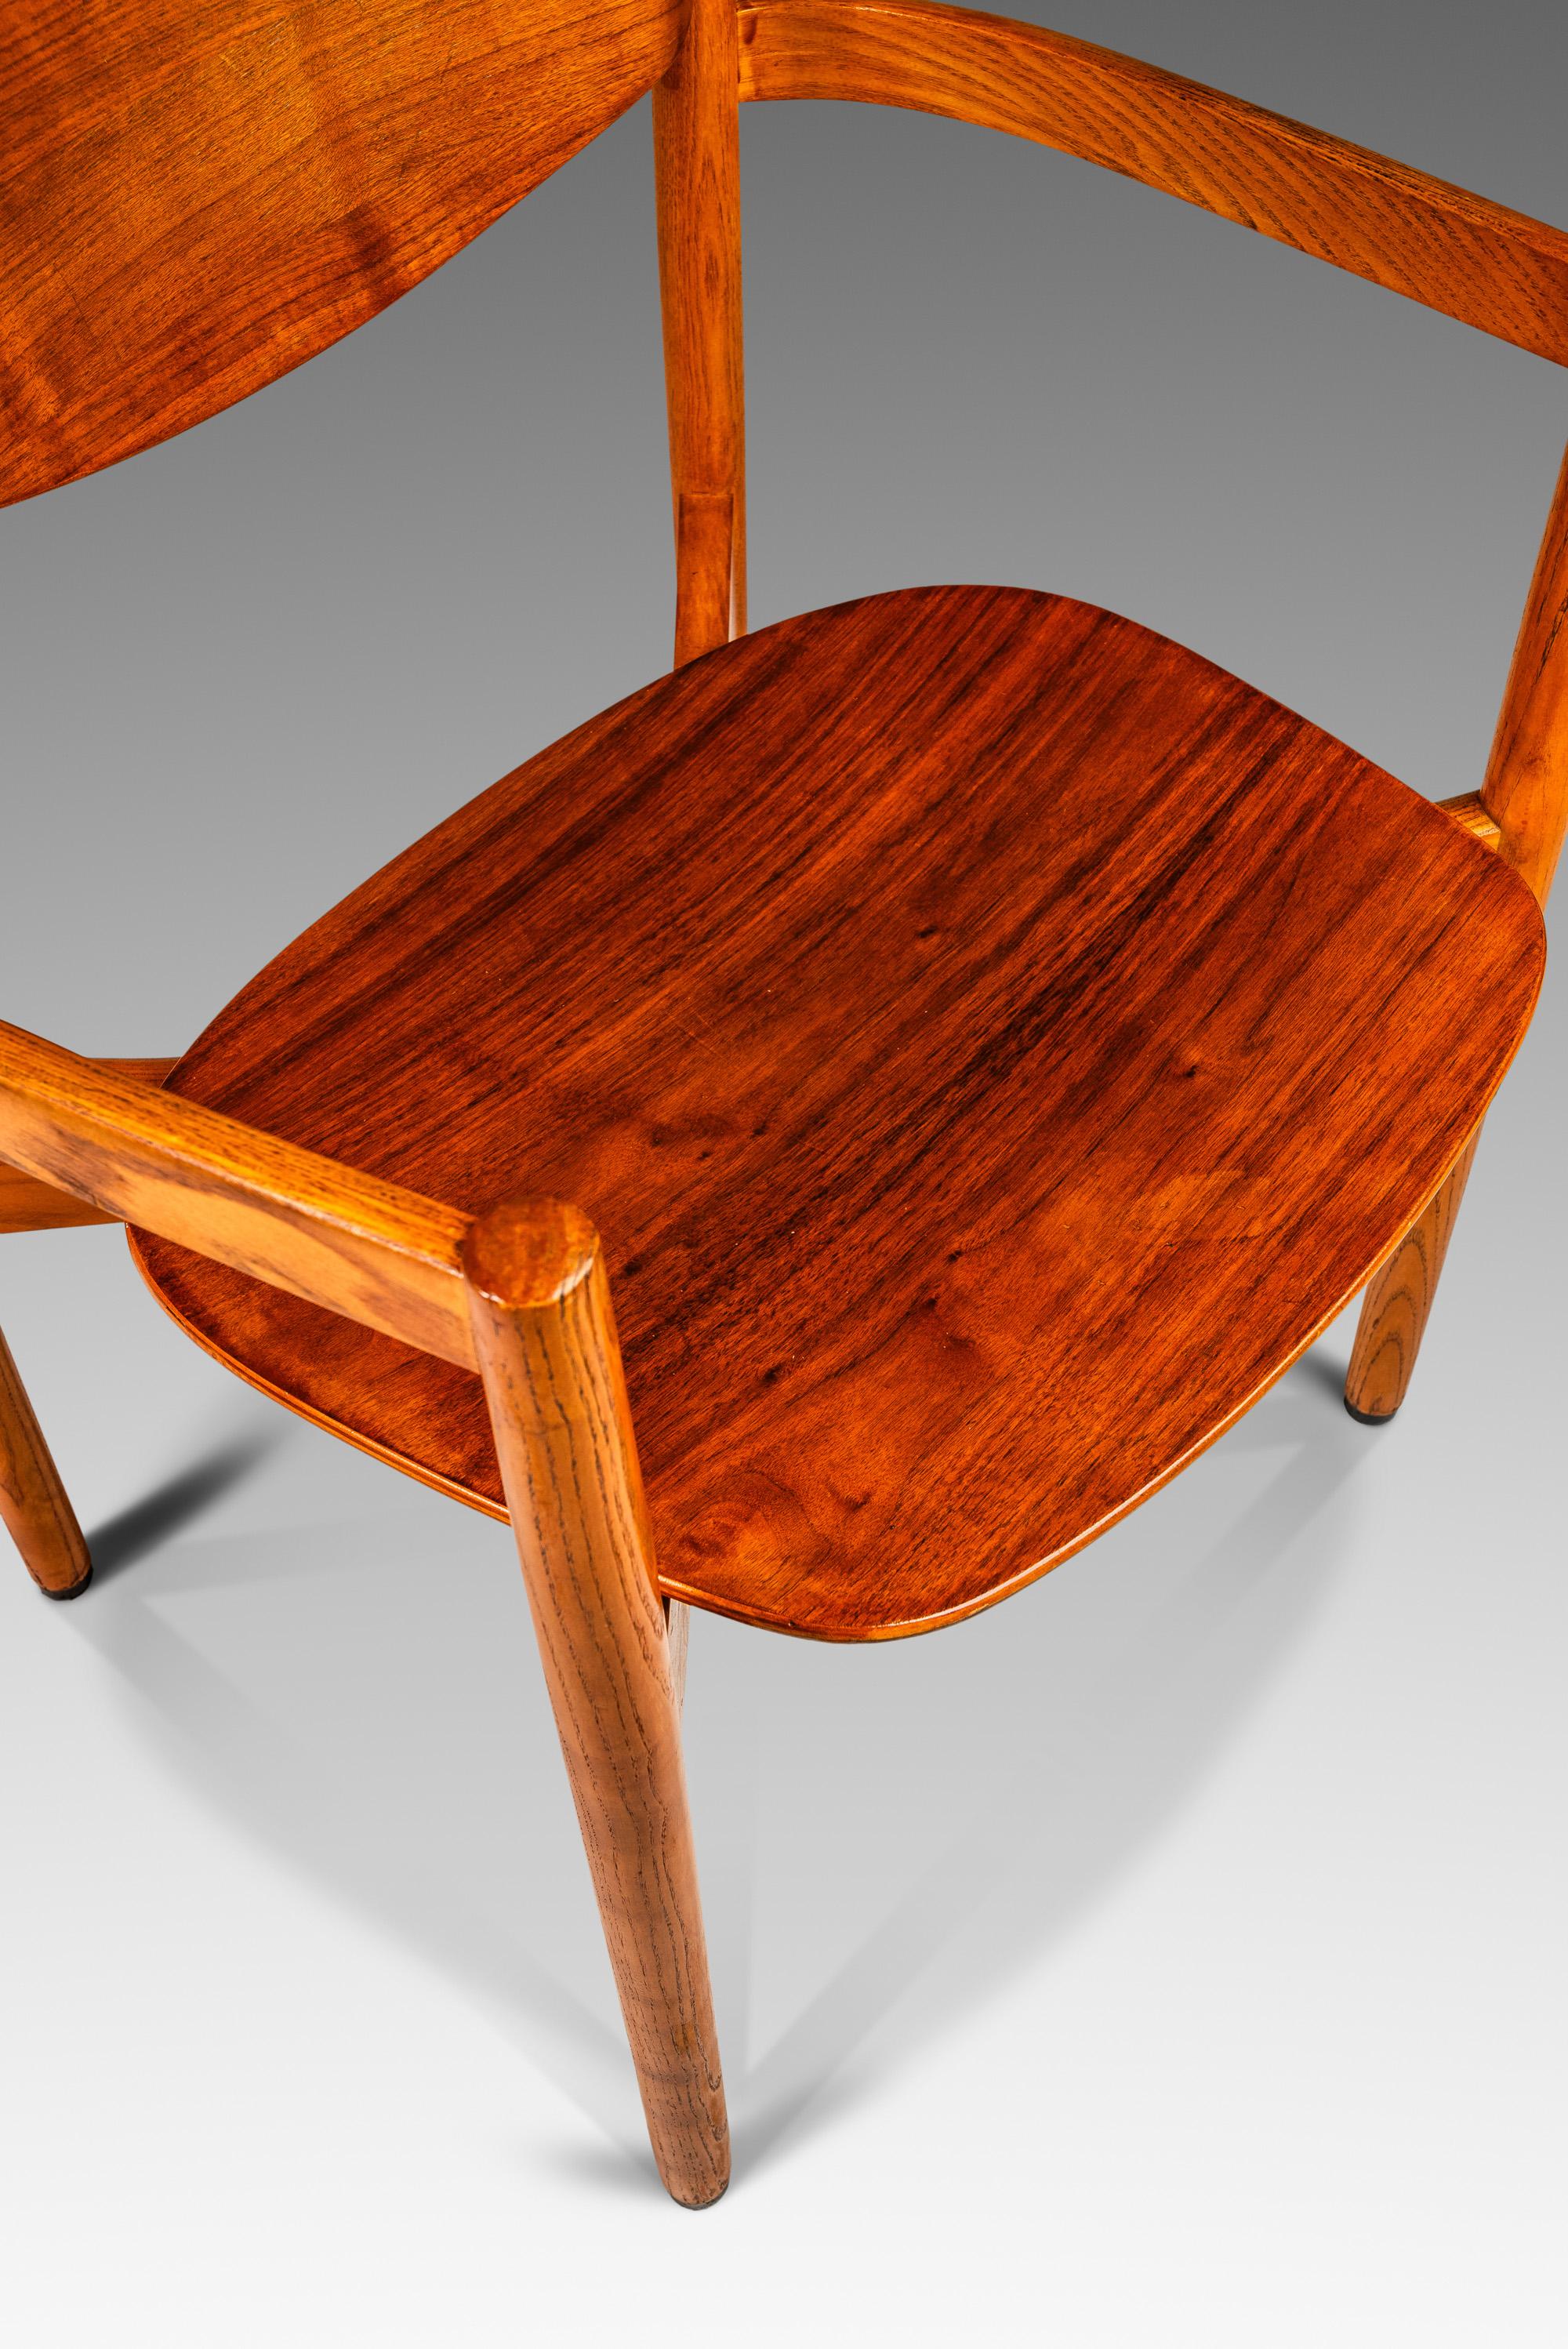 Set of 8 Mid-Century Stacking Chairs: Oak & Walnut, Jens Risom Design, USA, 1960 For Sale 4